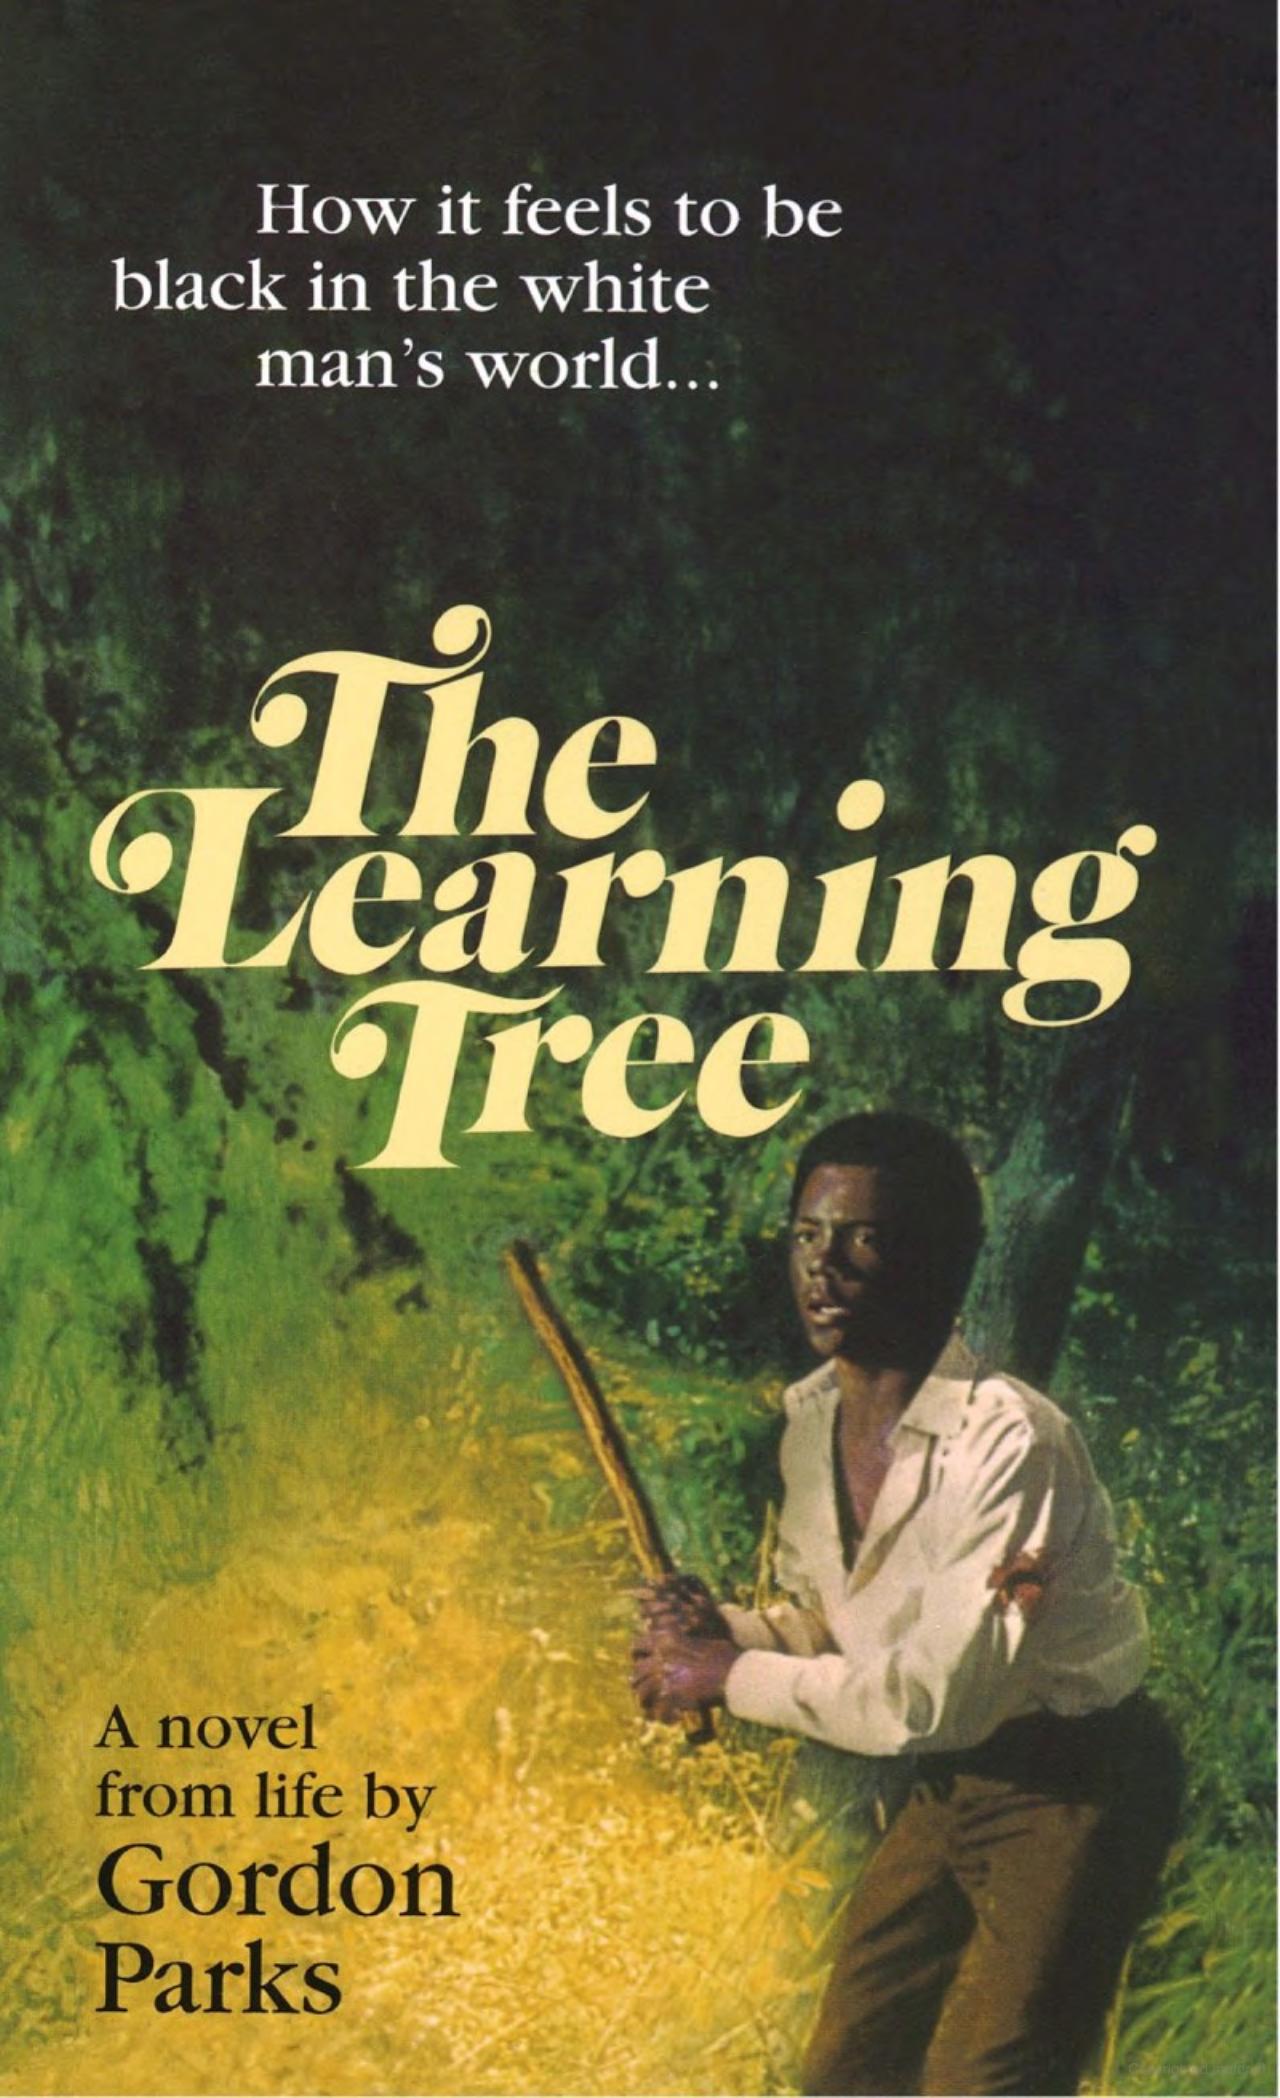 The Learning Tree by Gordon Parks book cover